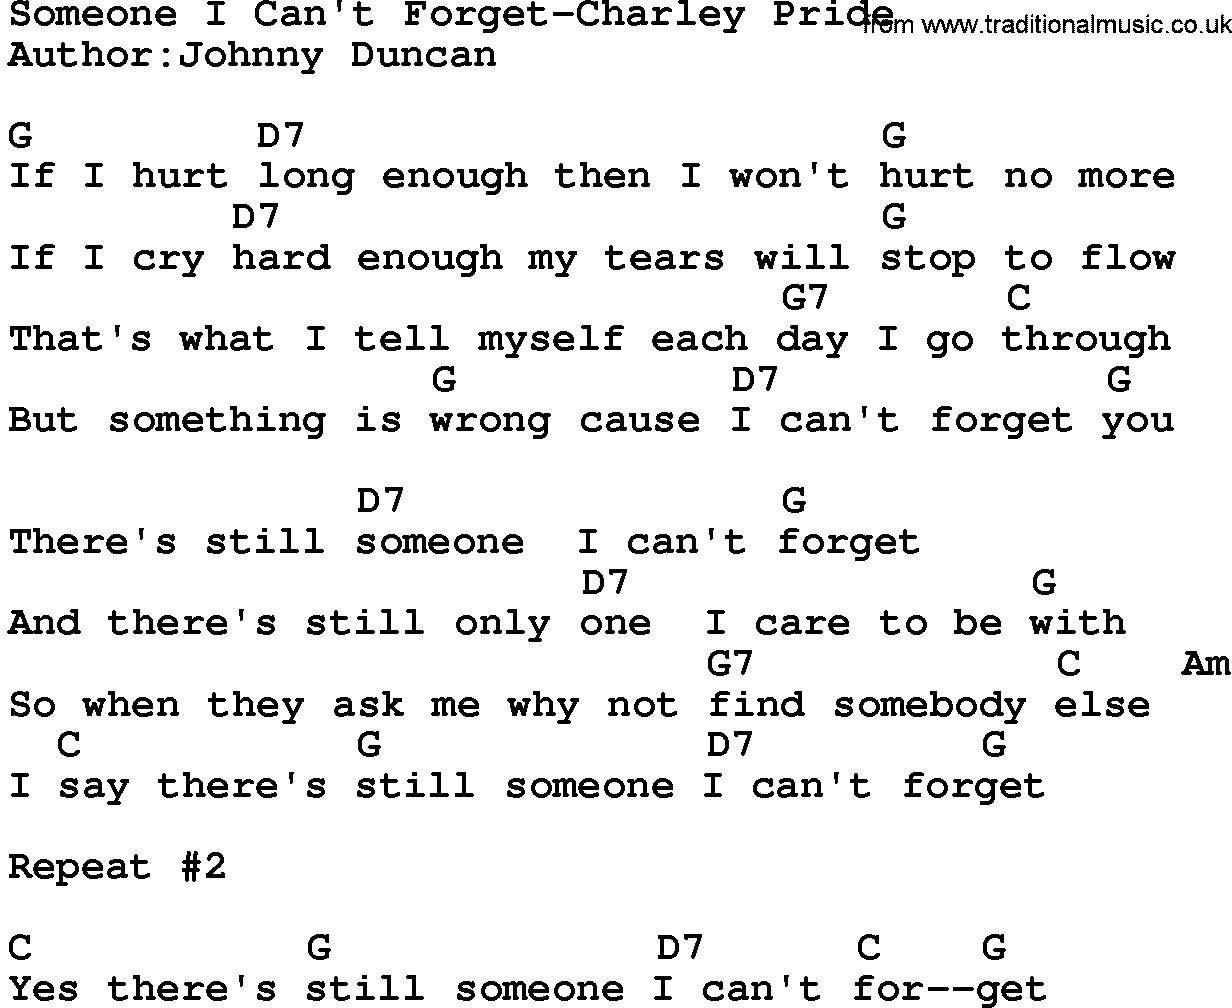 Country music song: Someone I Can't Forget-Charley Pride lyrics and chords